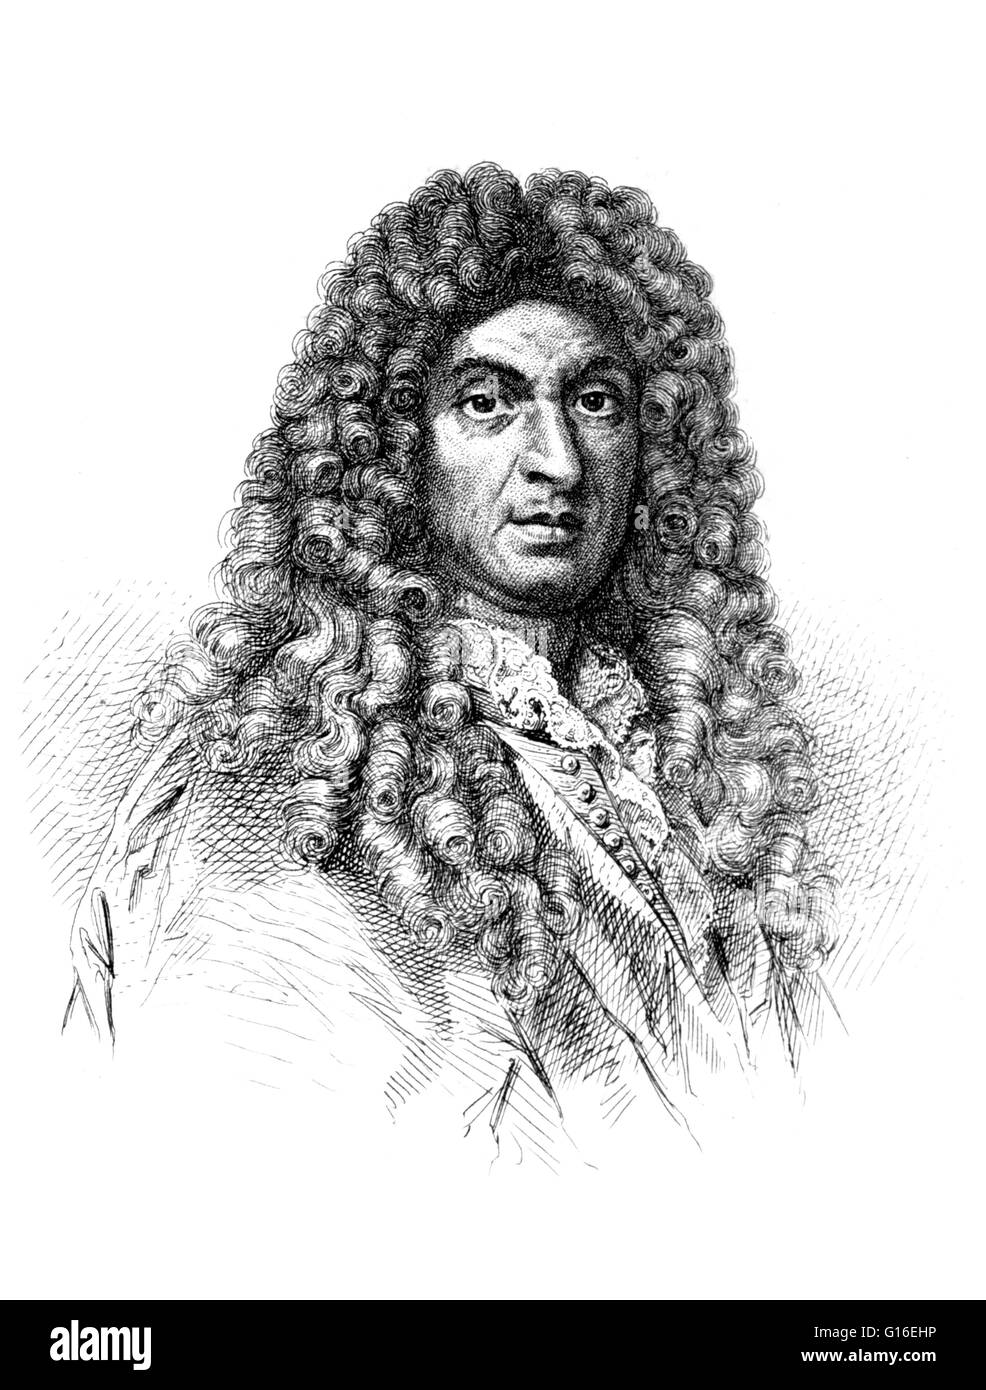 Jean-Baptiste Lully (born Giovanni Battista Lulli November 28, 1632 - March  22, 1687) was an Italian-born French composer, instrumentalist, and dancer  who spent most of his life working in the court of